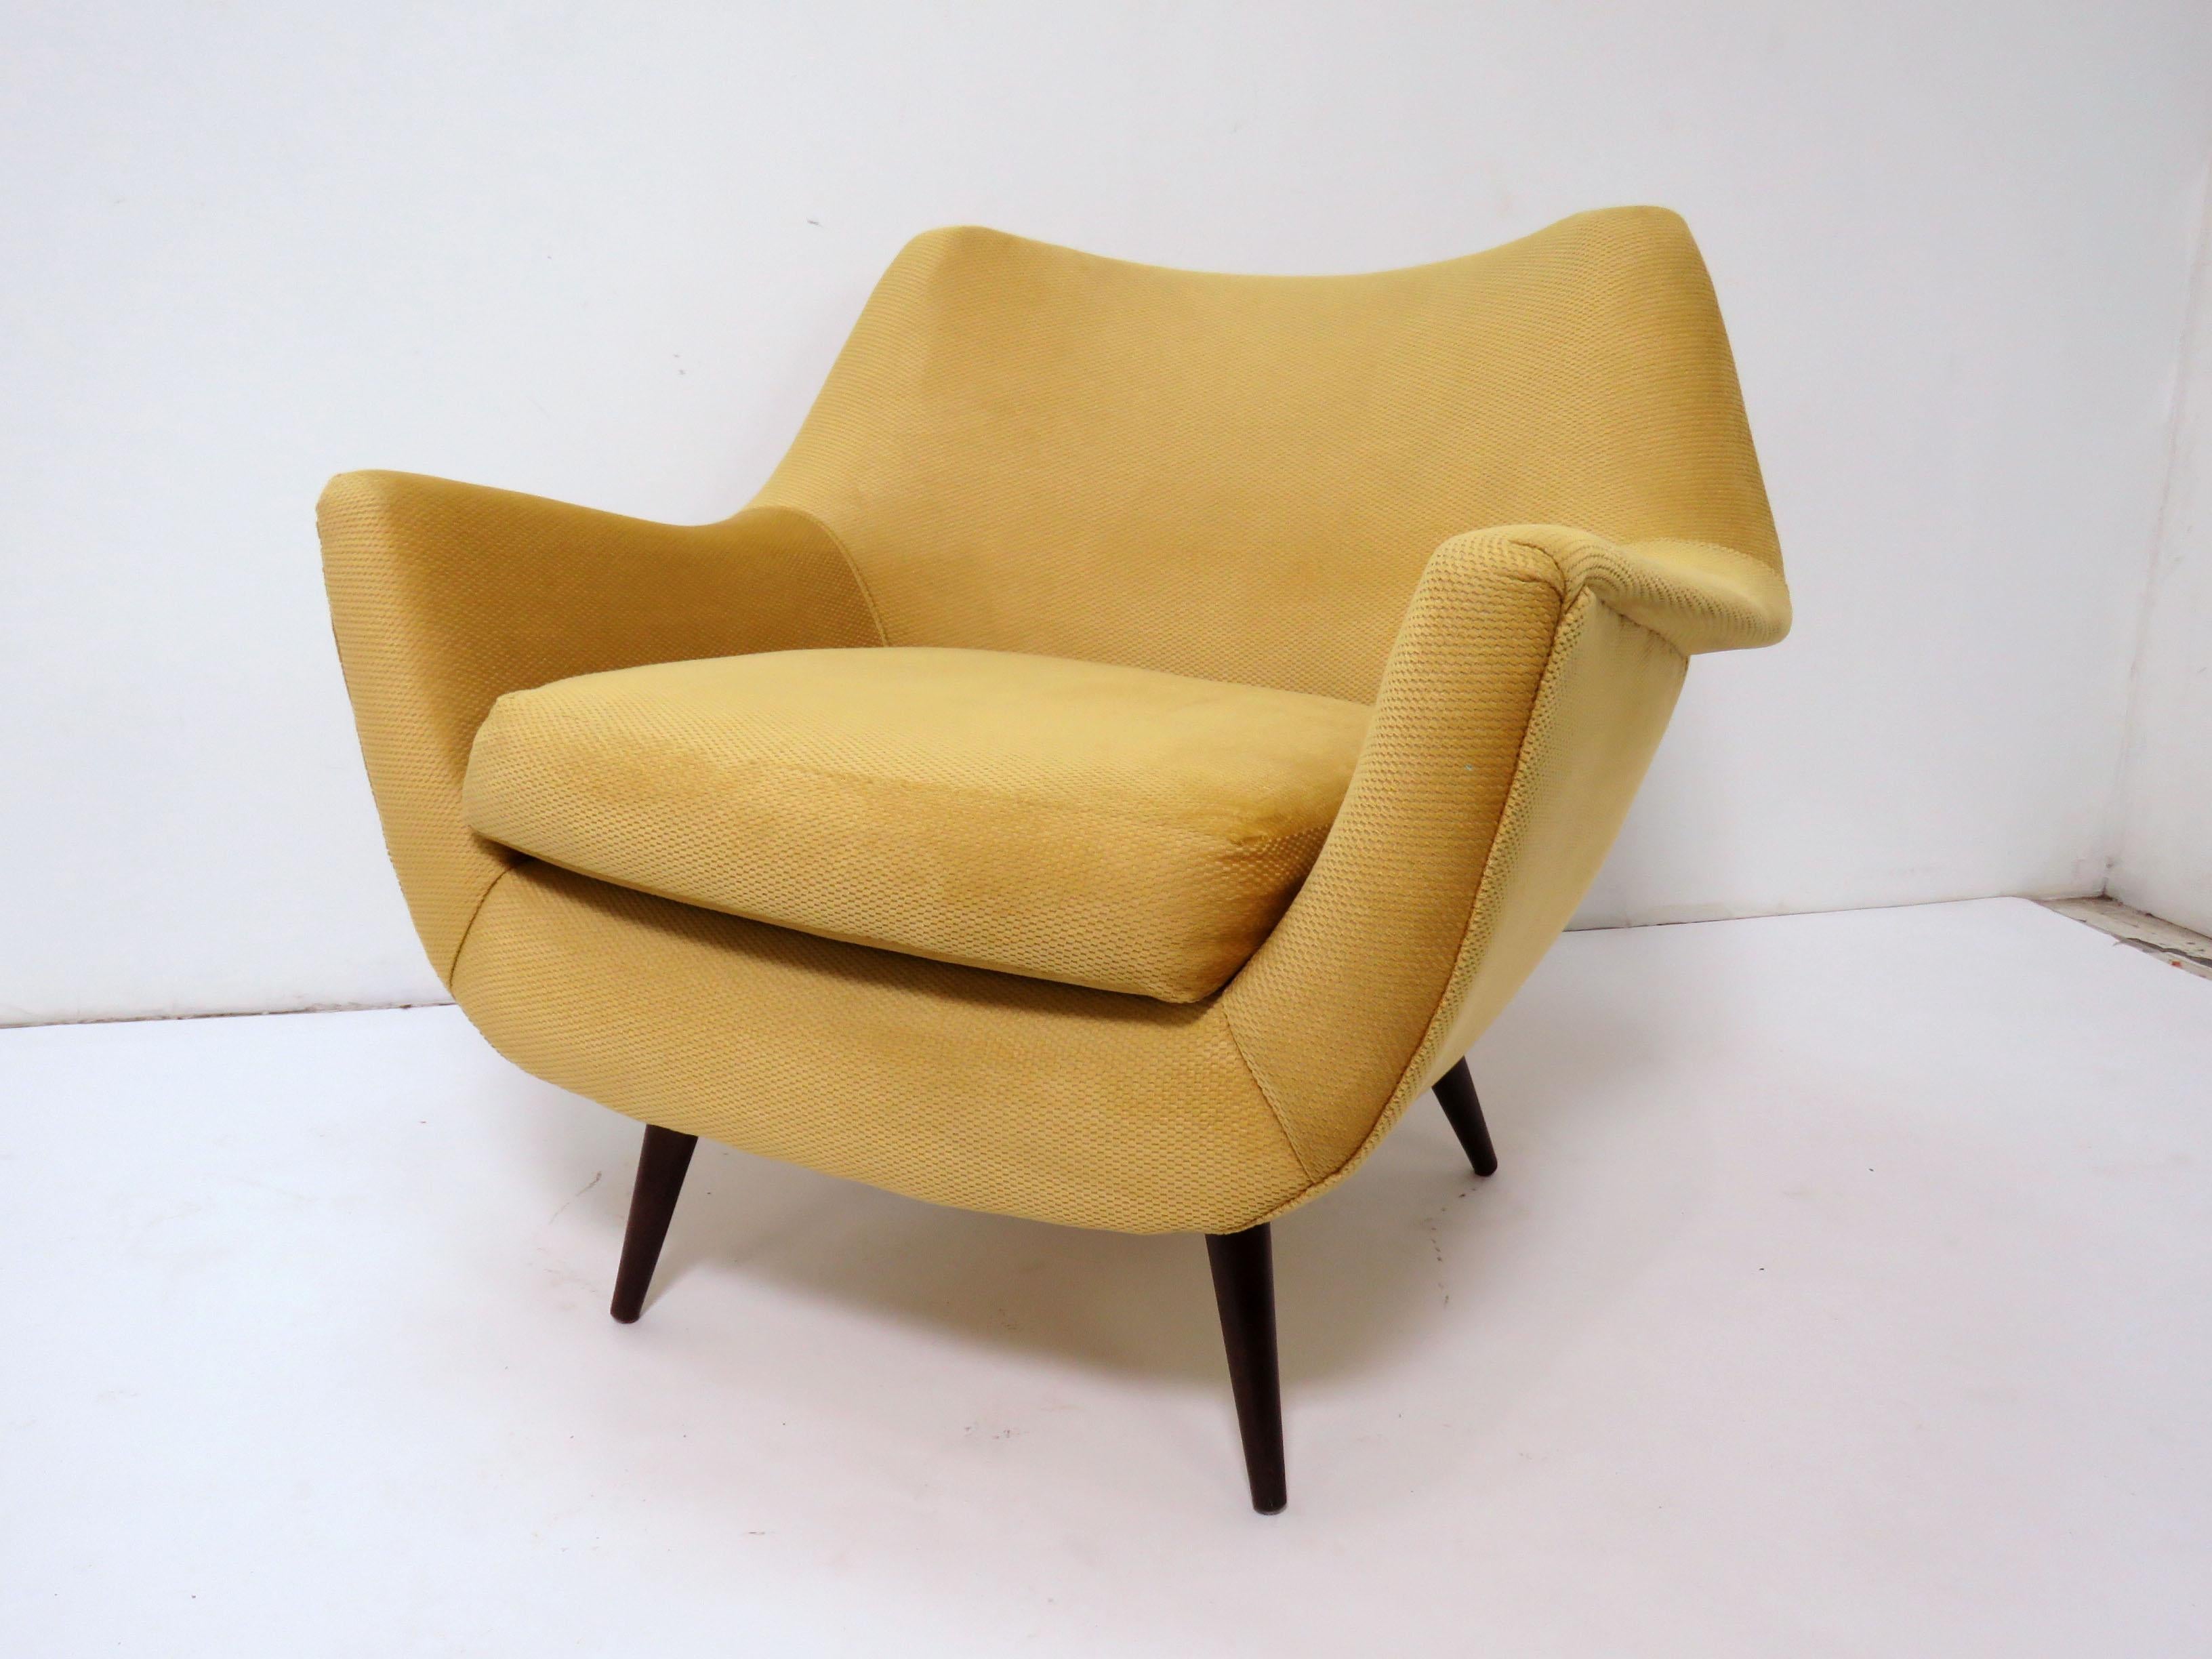 Upholstery Lawrence Peabody Midcentury Lounge Chair and Ottoman, circa 1950s